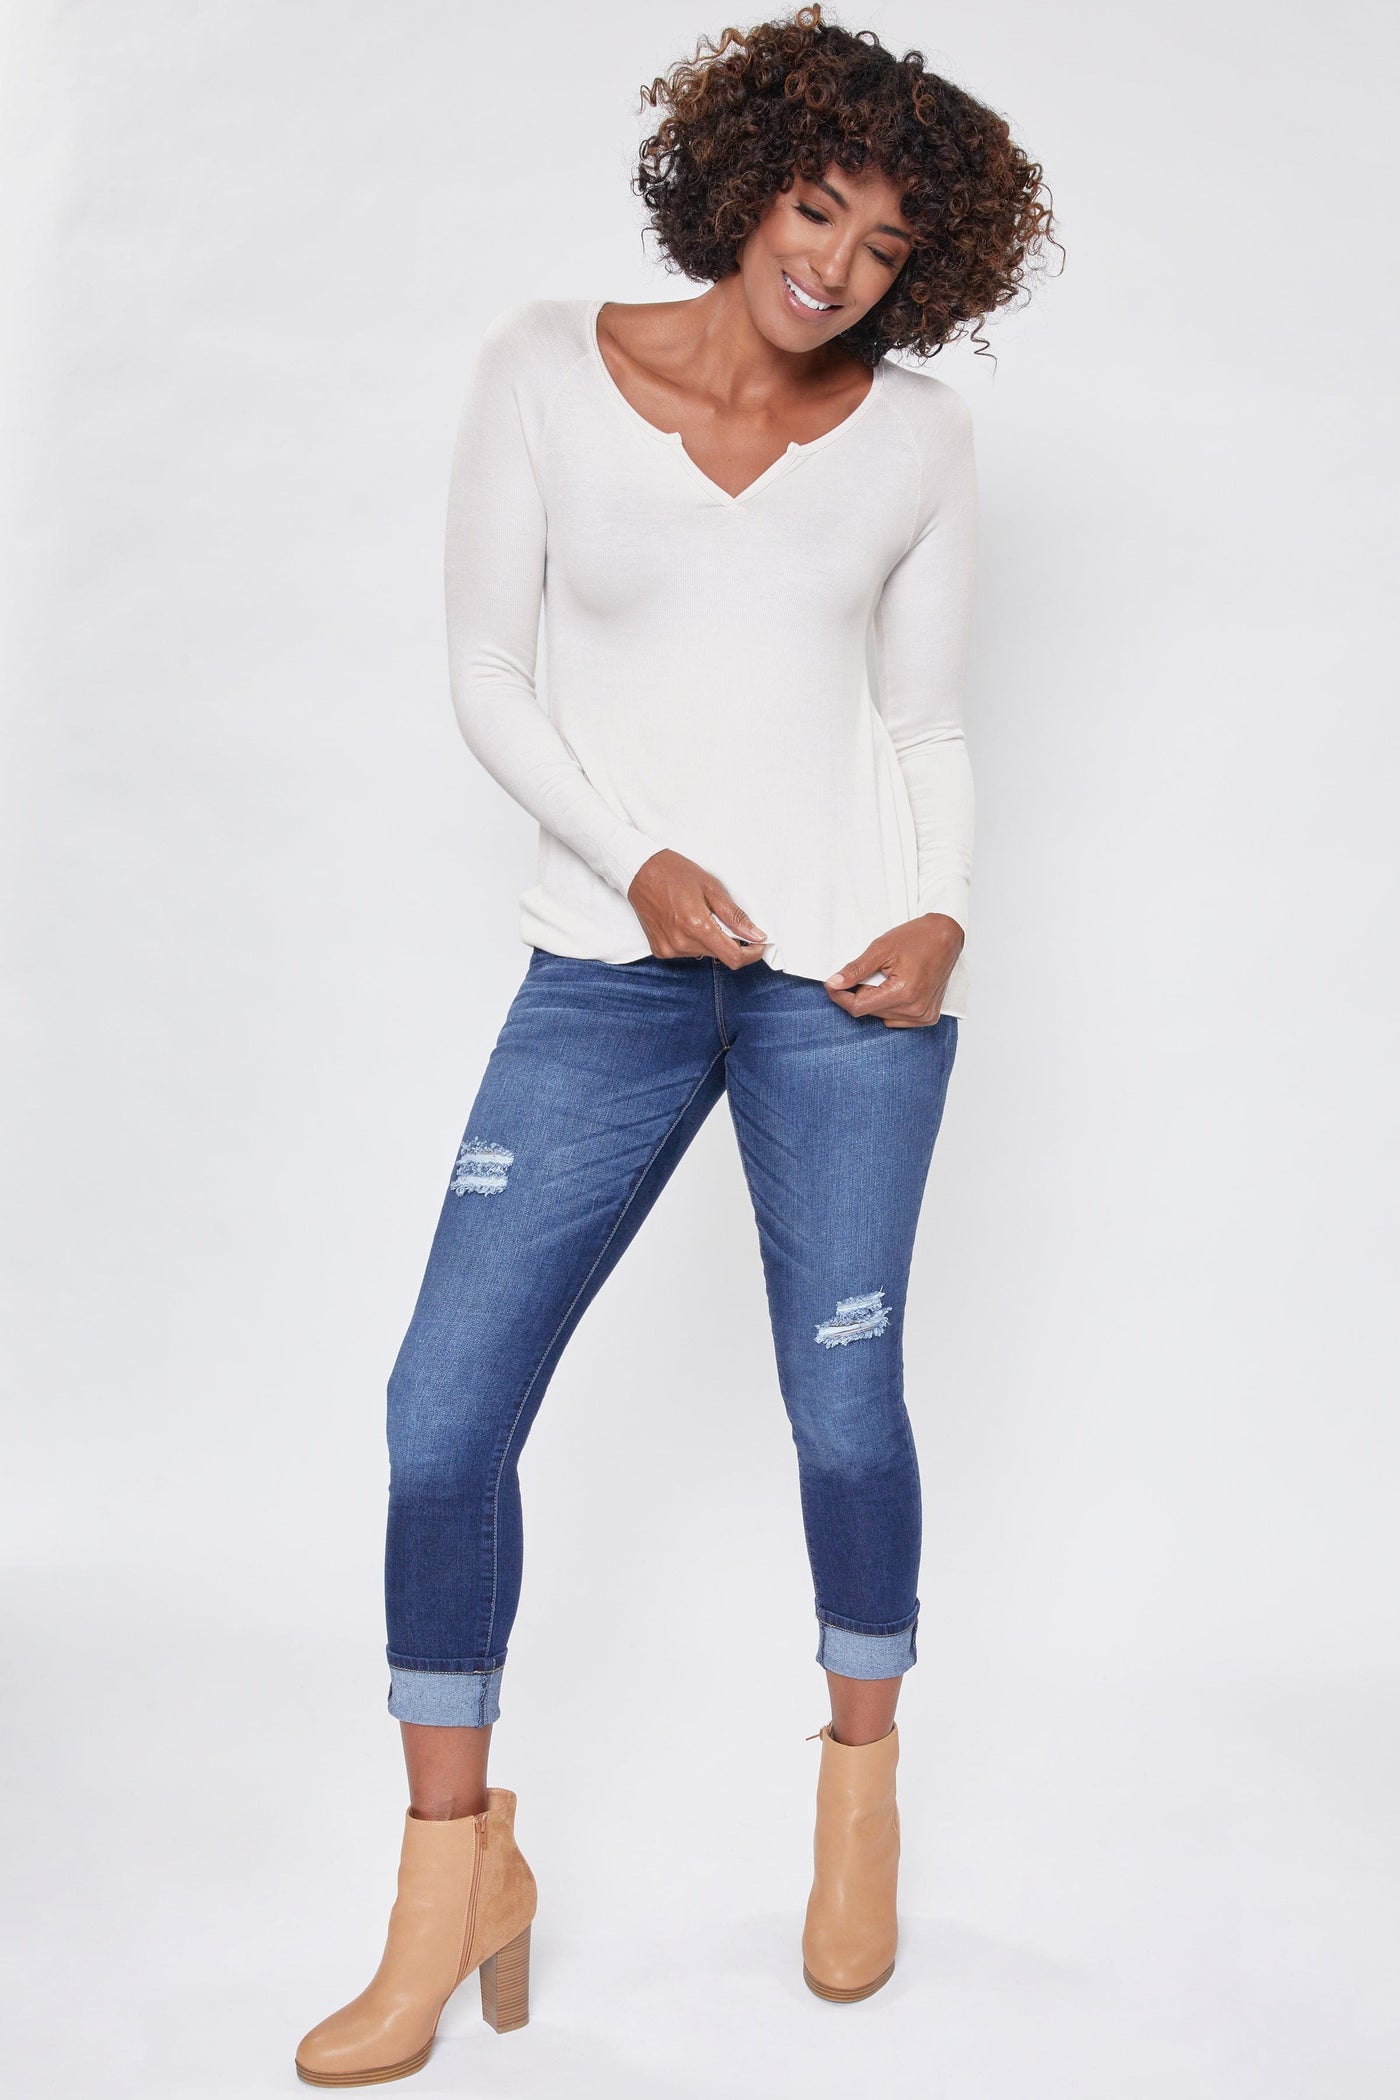 Women's Long Sleeve Ribbed Tee With Notched Collar Deal-Sale